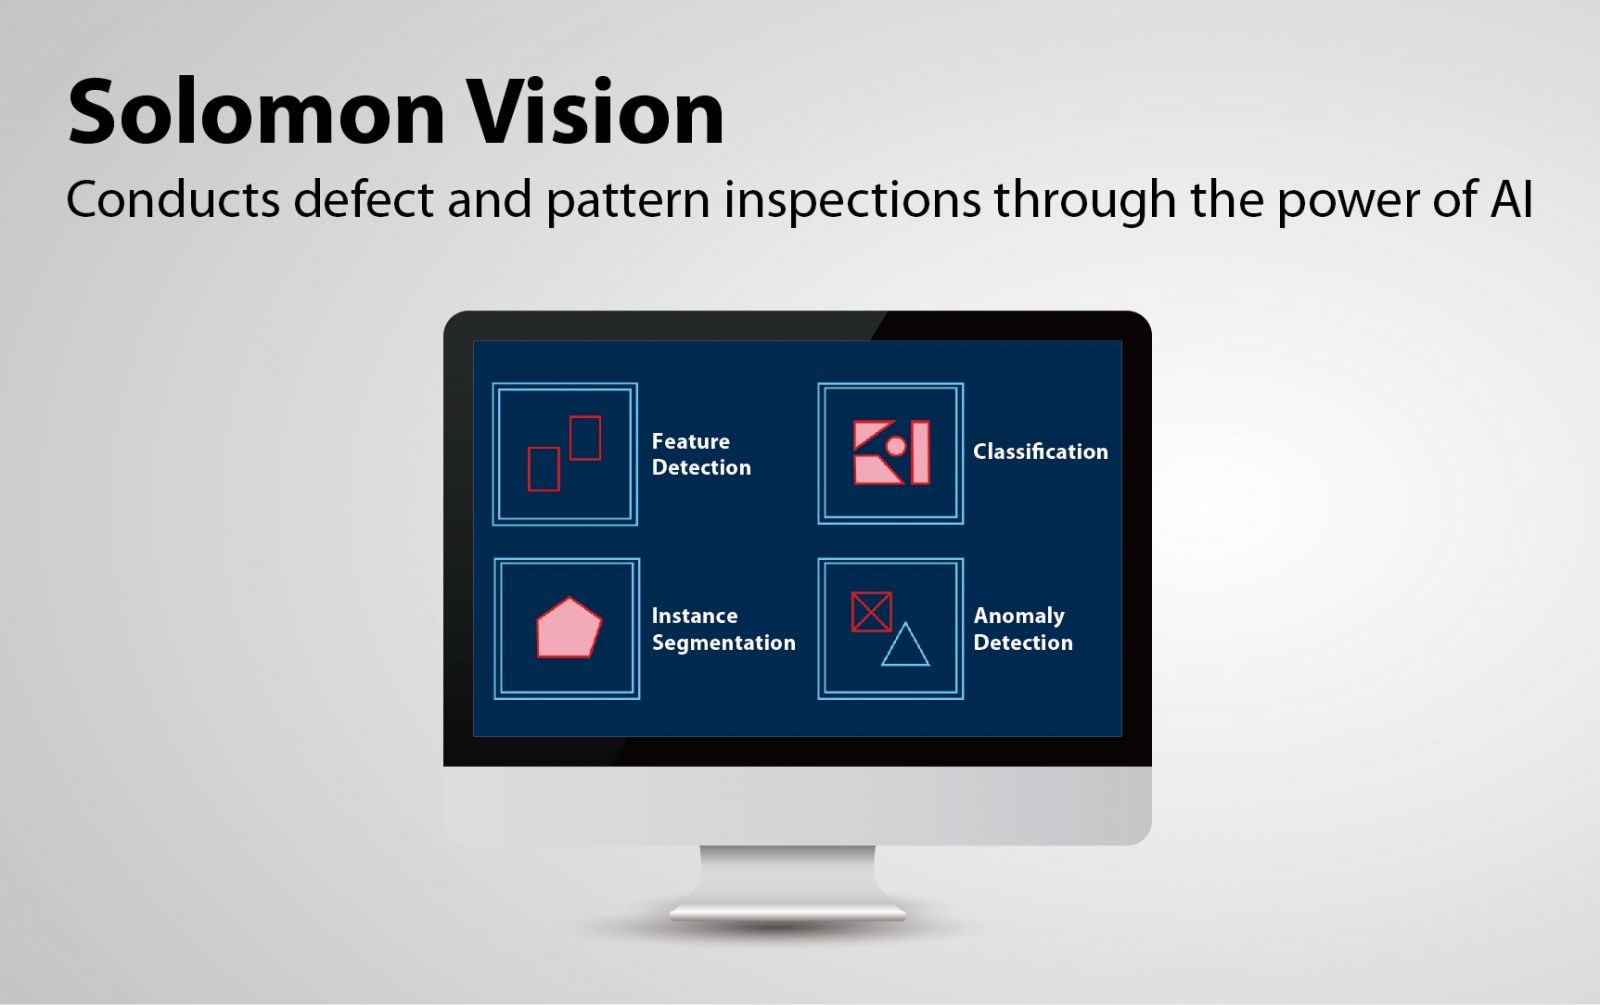 Conducts defect and pattern inspections through the power of AI